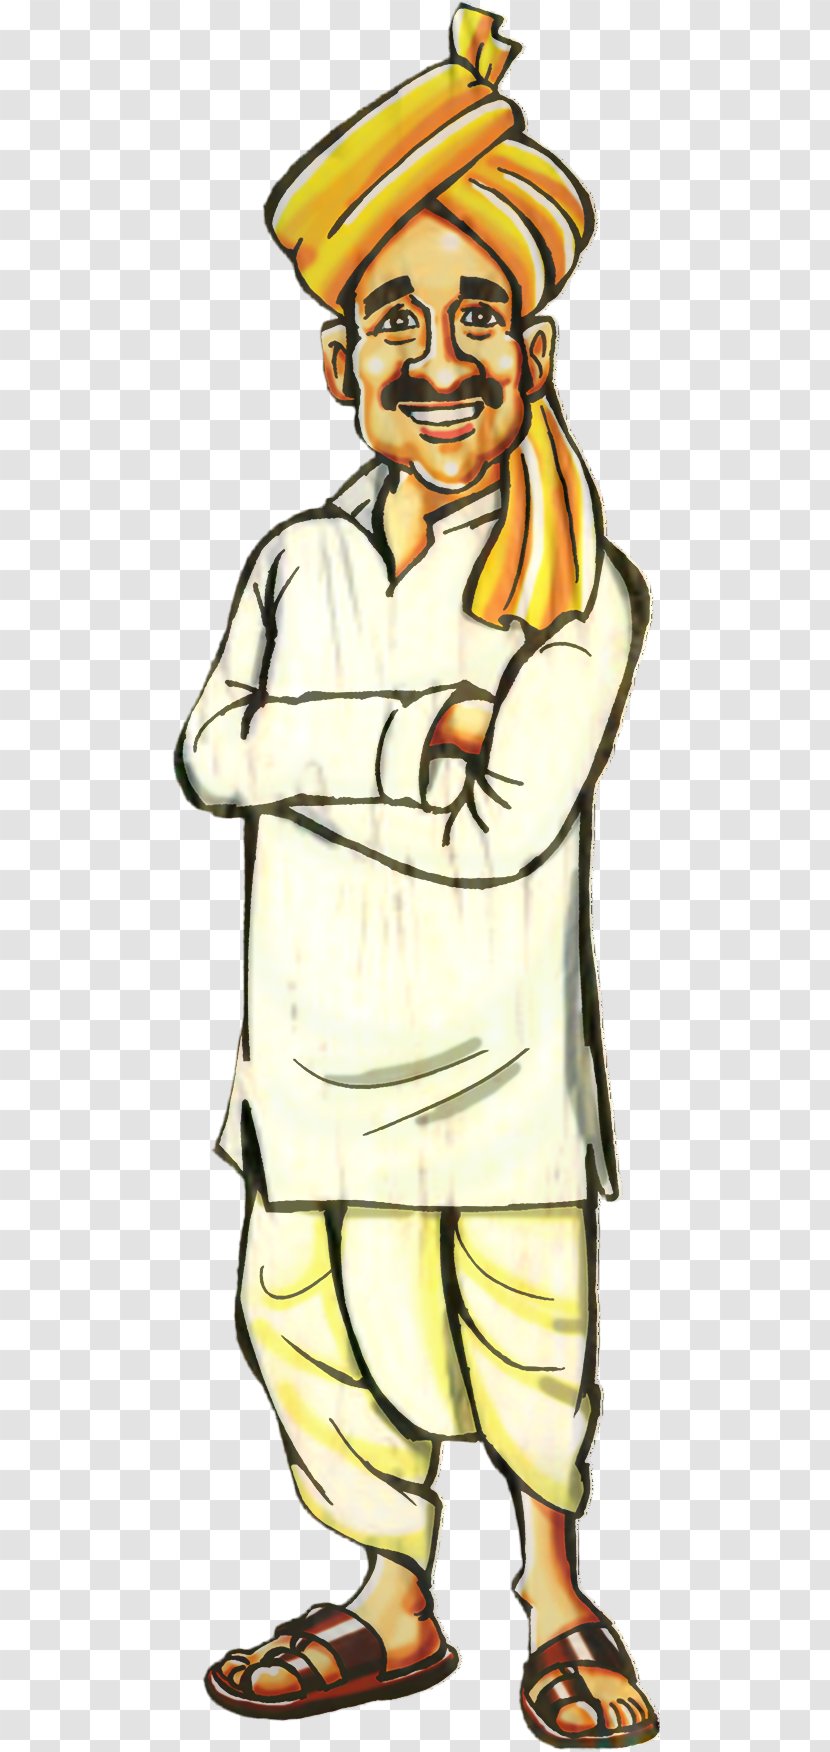 India Drawing - Costume - Gesture Transparent PNG